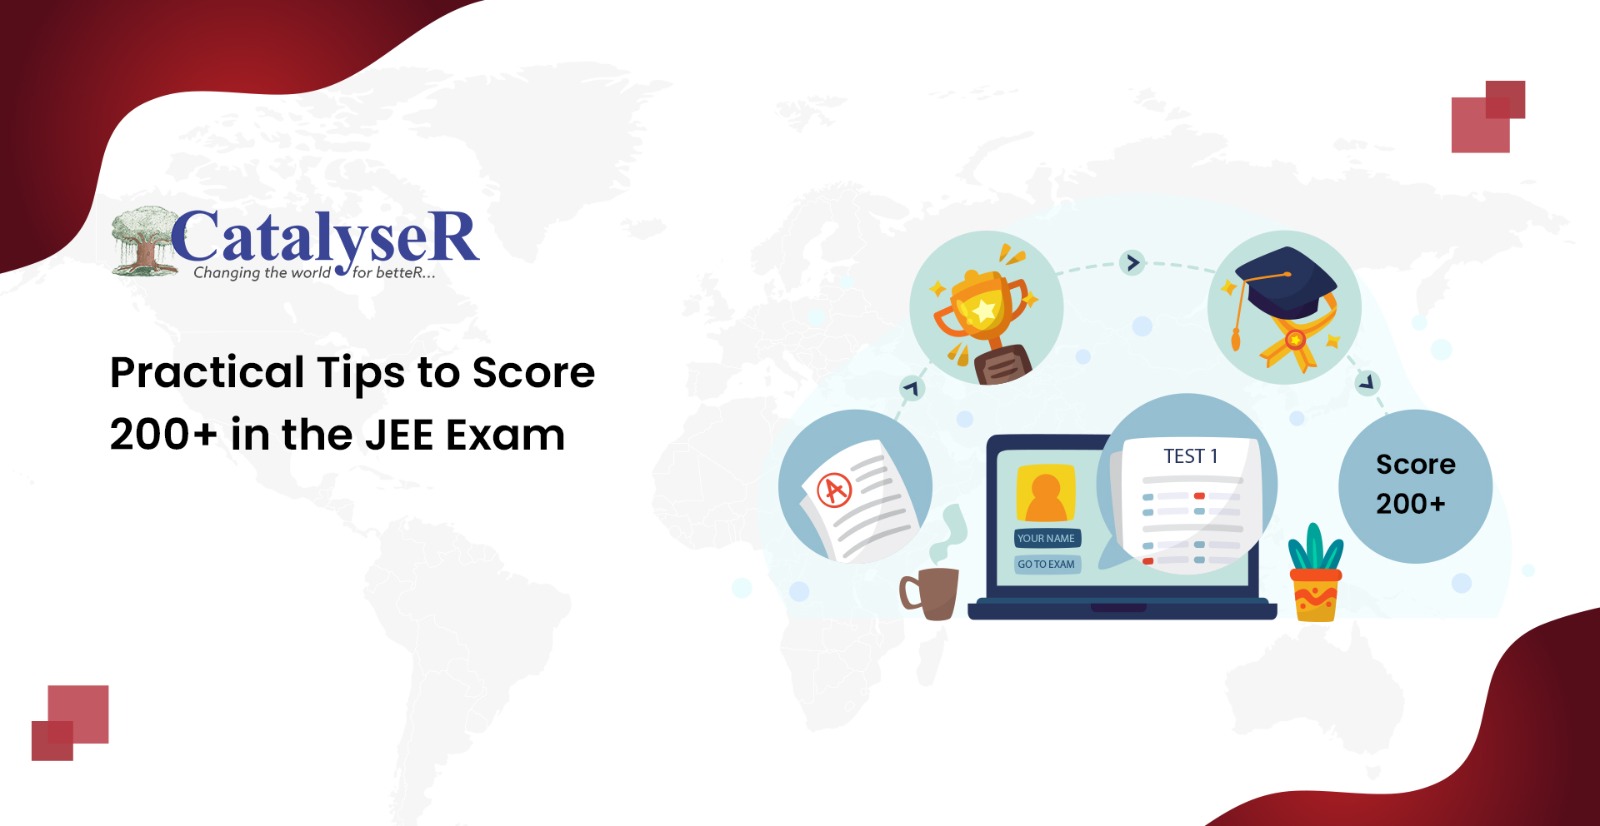 Practical Tips to Score 200+ in the JEE Exam